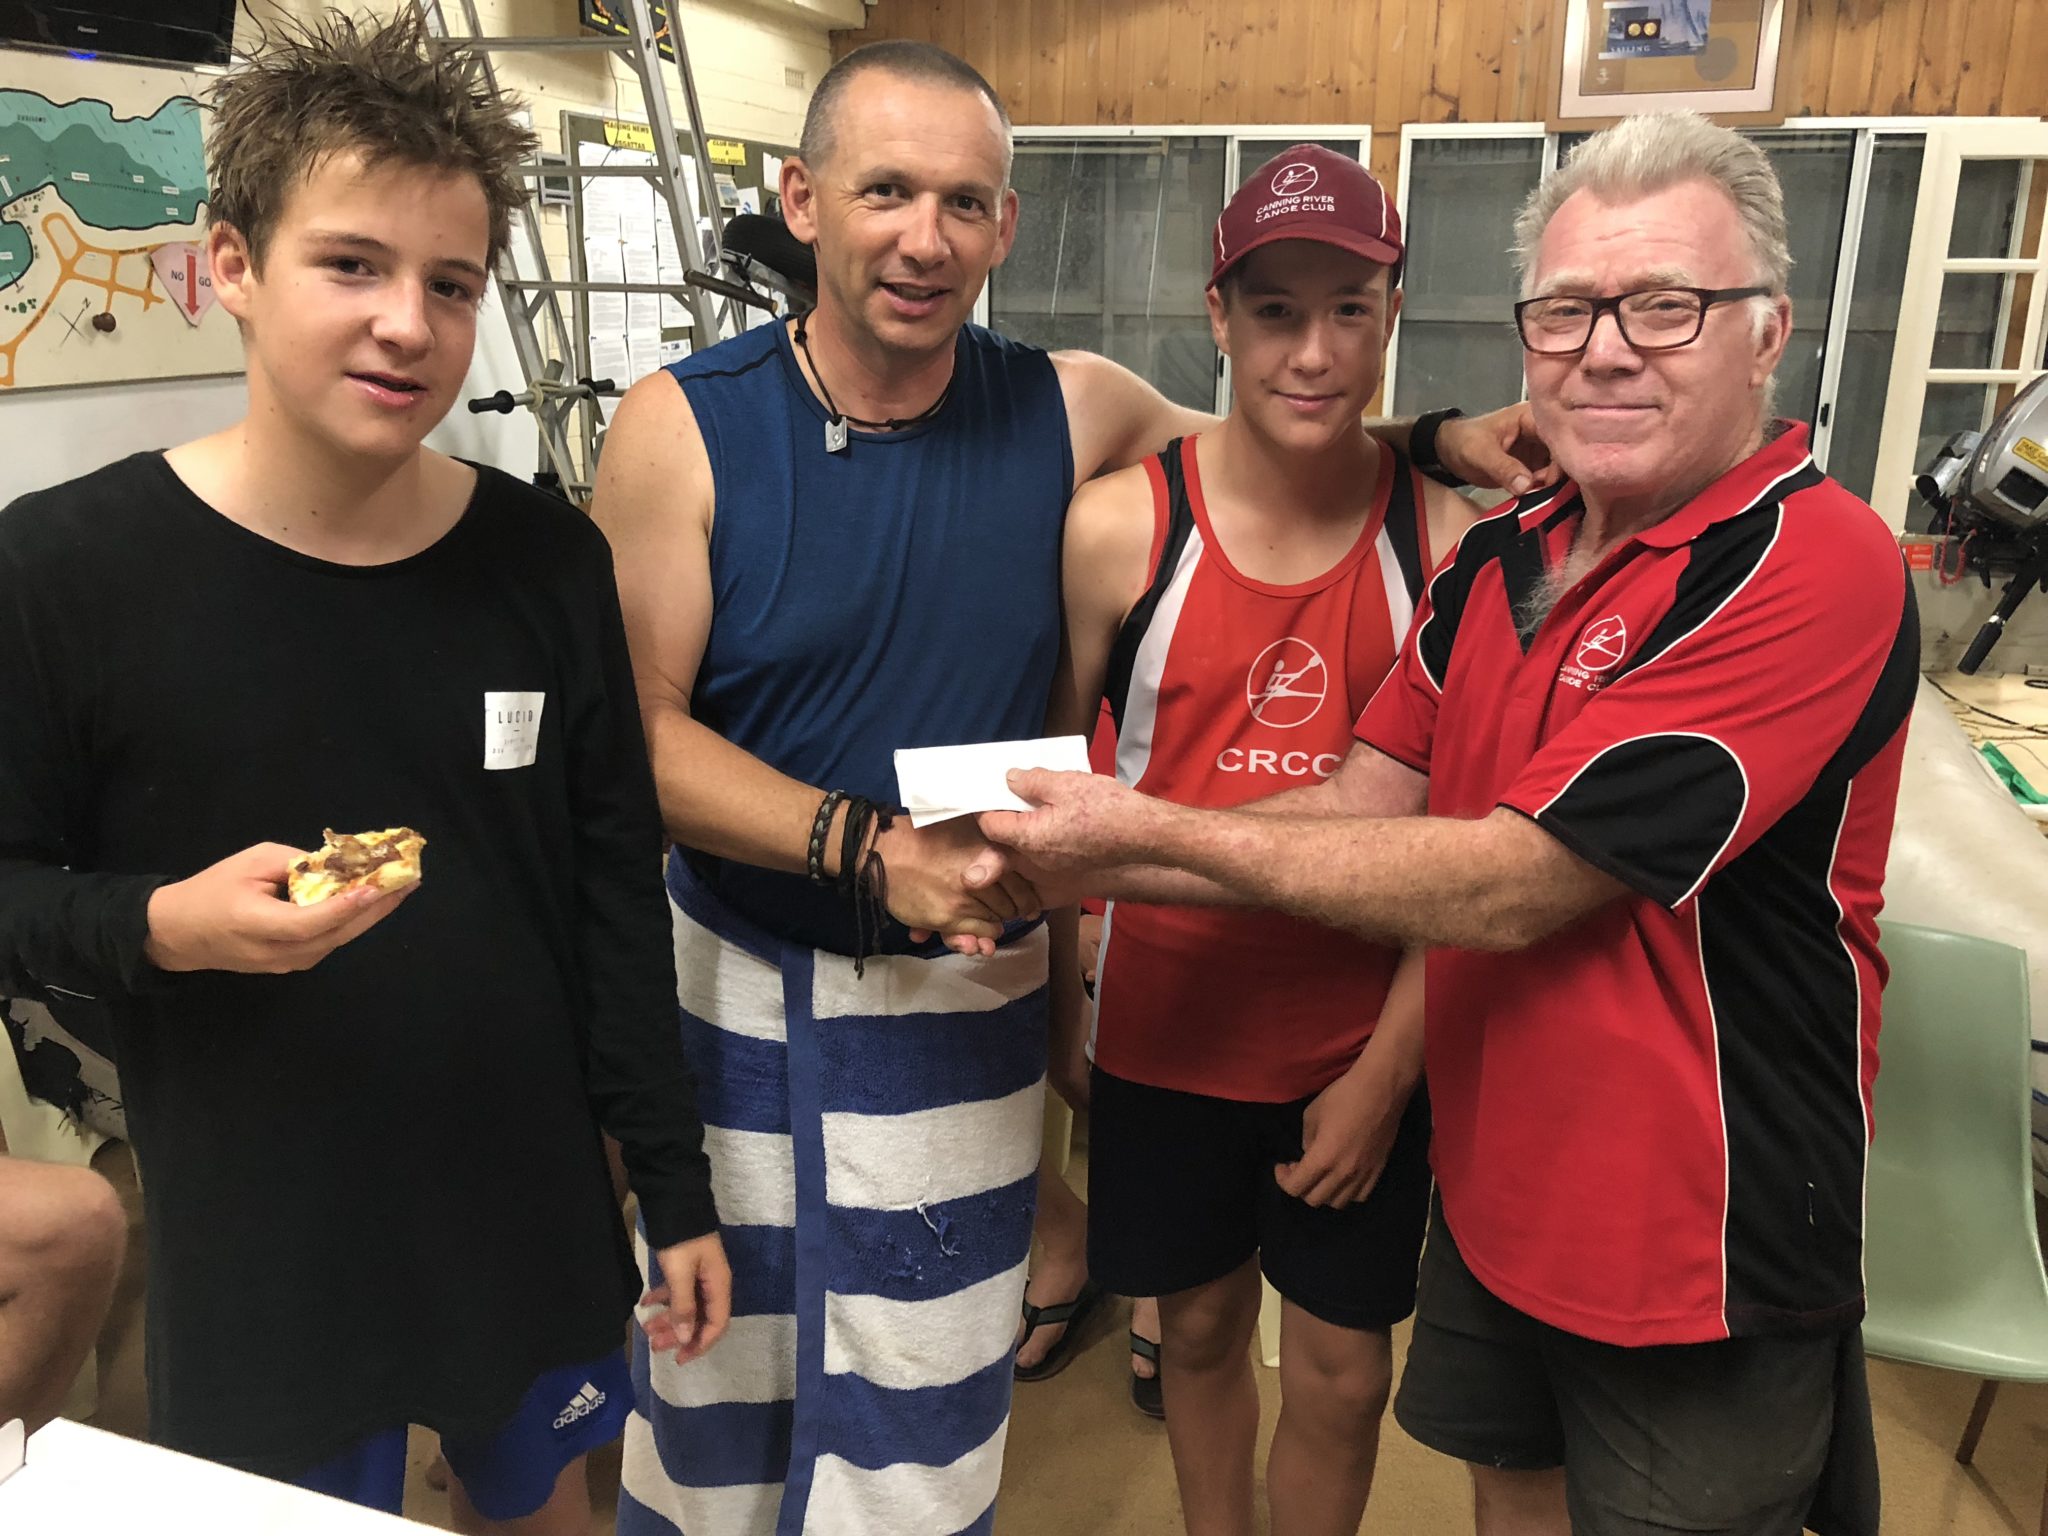 Tuesday 3rd April 2018 : Tonight’s photo shows Club Member David Gardiner presenting the Boldy’s with their movie vouchers